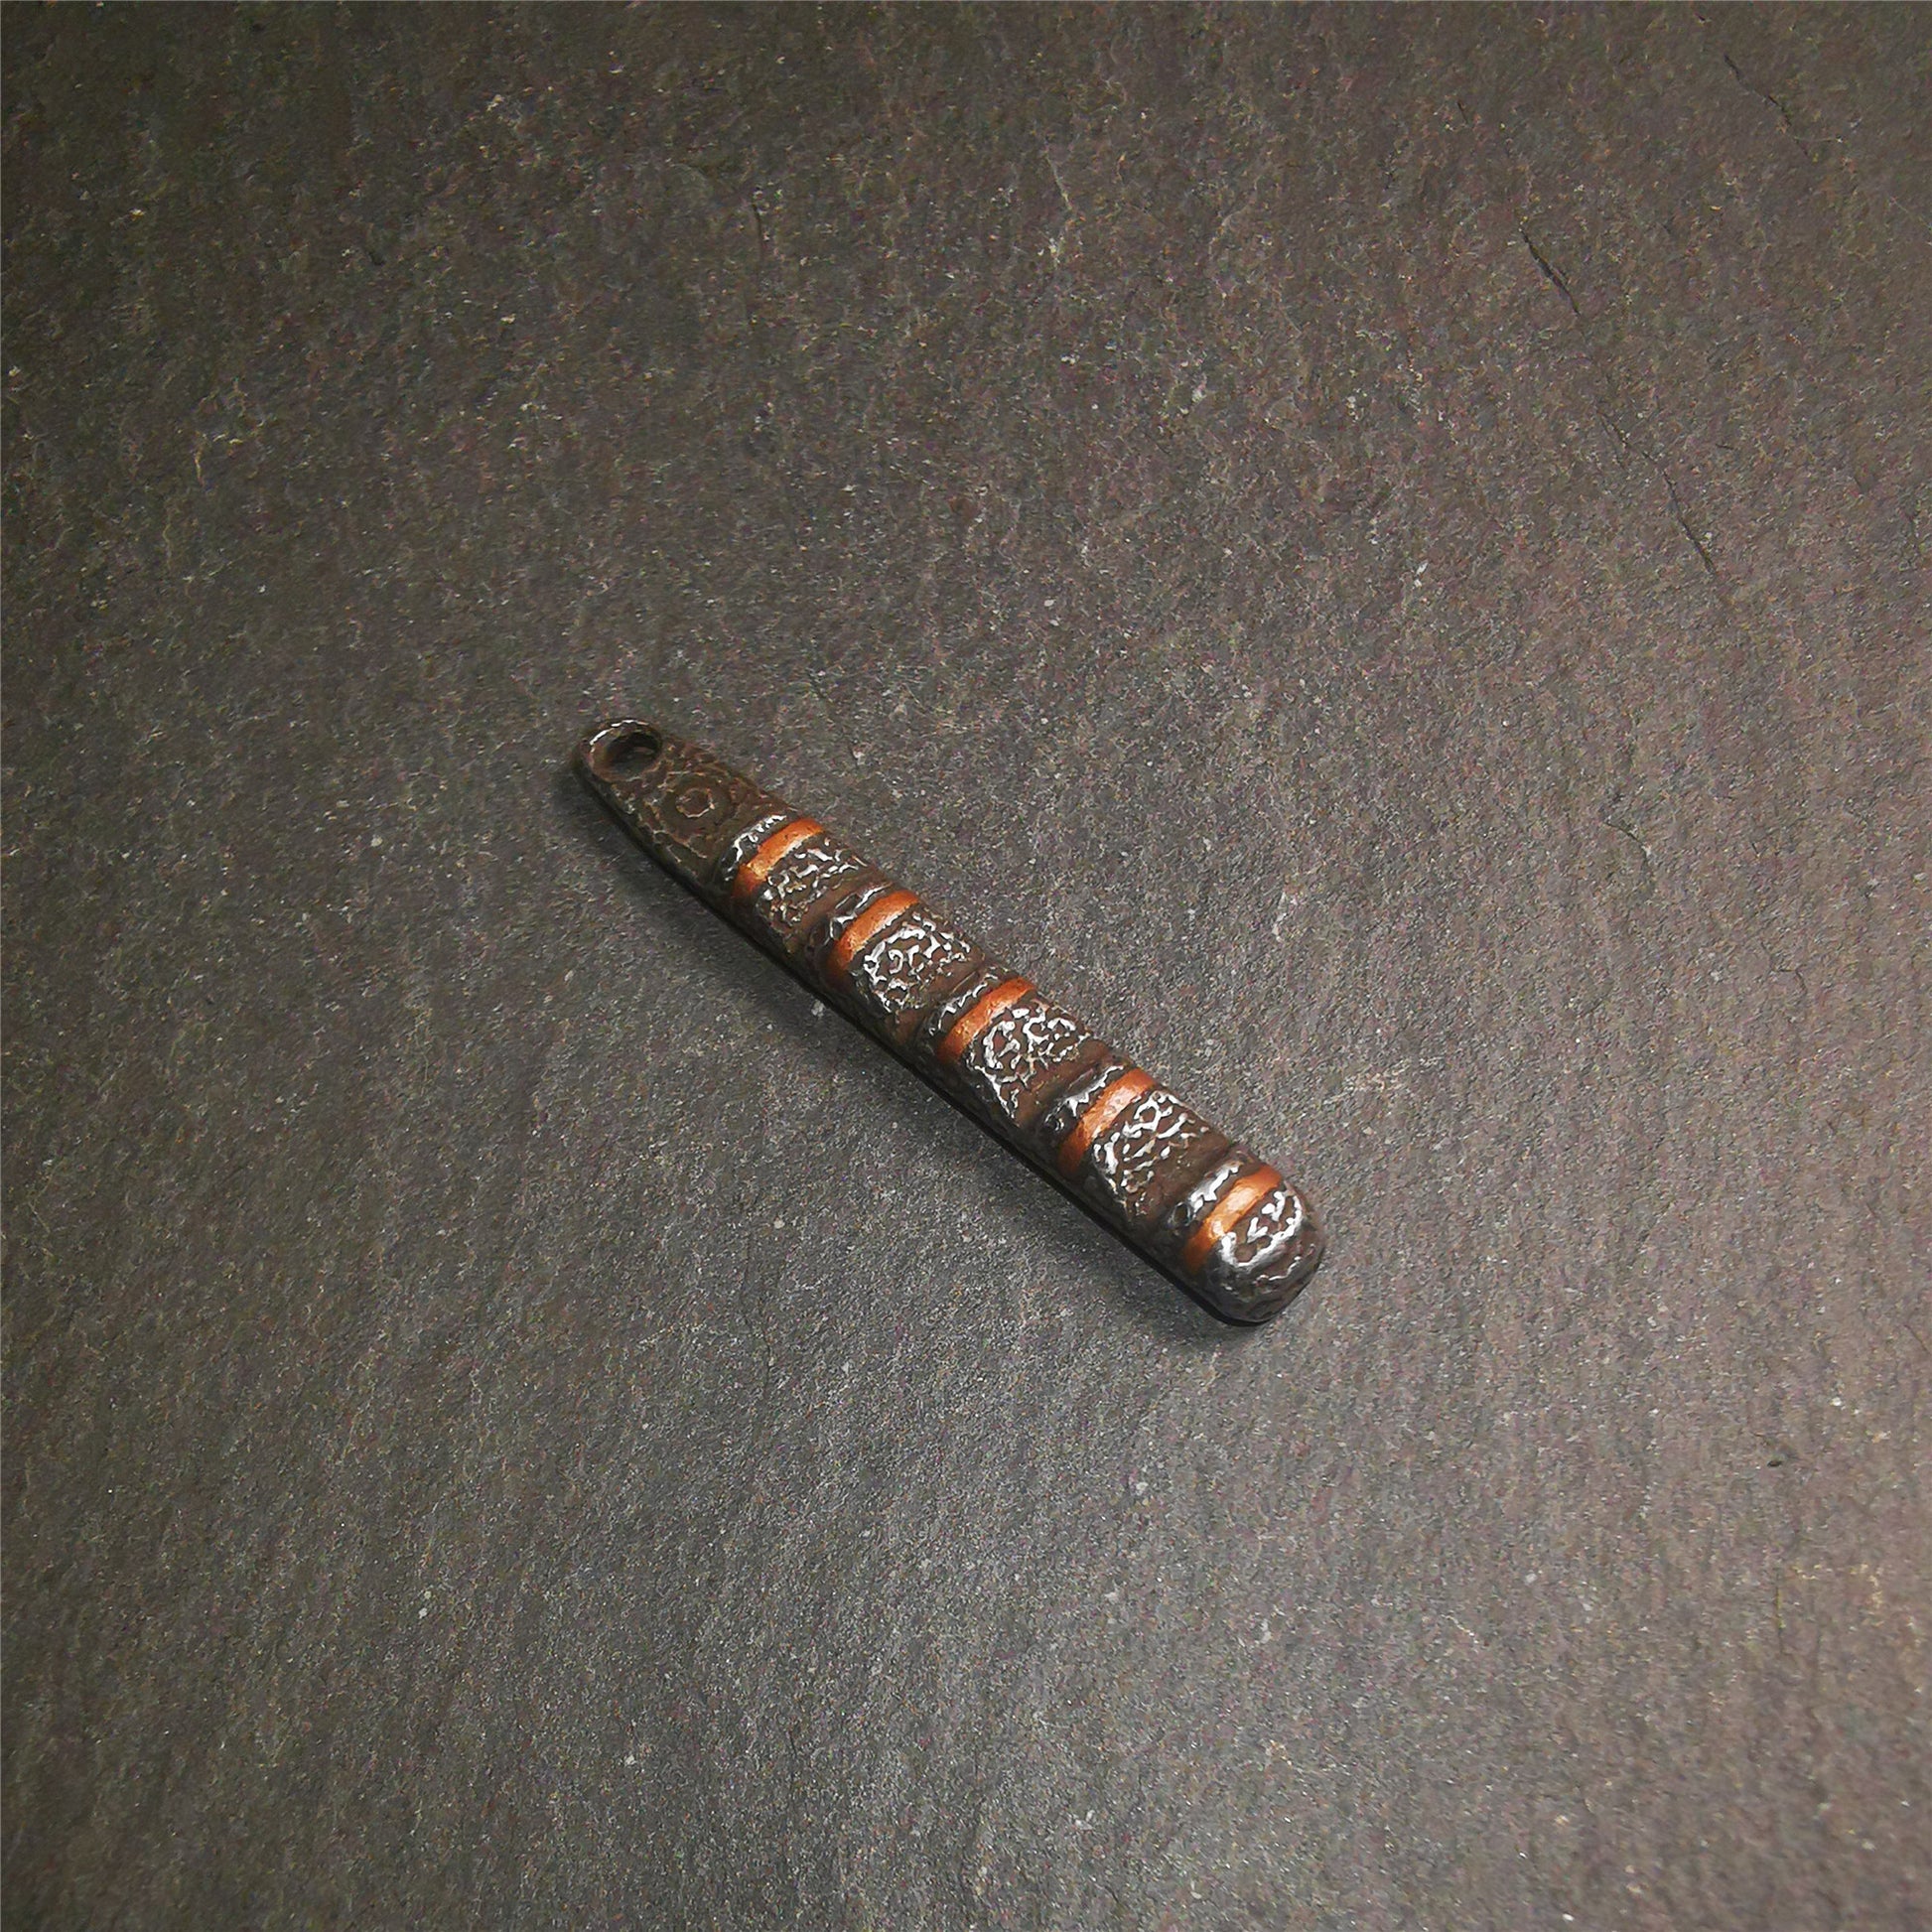 This unique Ladder pendant is made by Tibetan craftsmen. It is made of cold iron and copper, black color,the shape is Tibetan Ladder of Heaven,length is 45mm. You can make it into a pendant,keychain, or just put it on your desk,as an ornament.